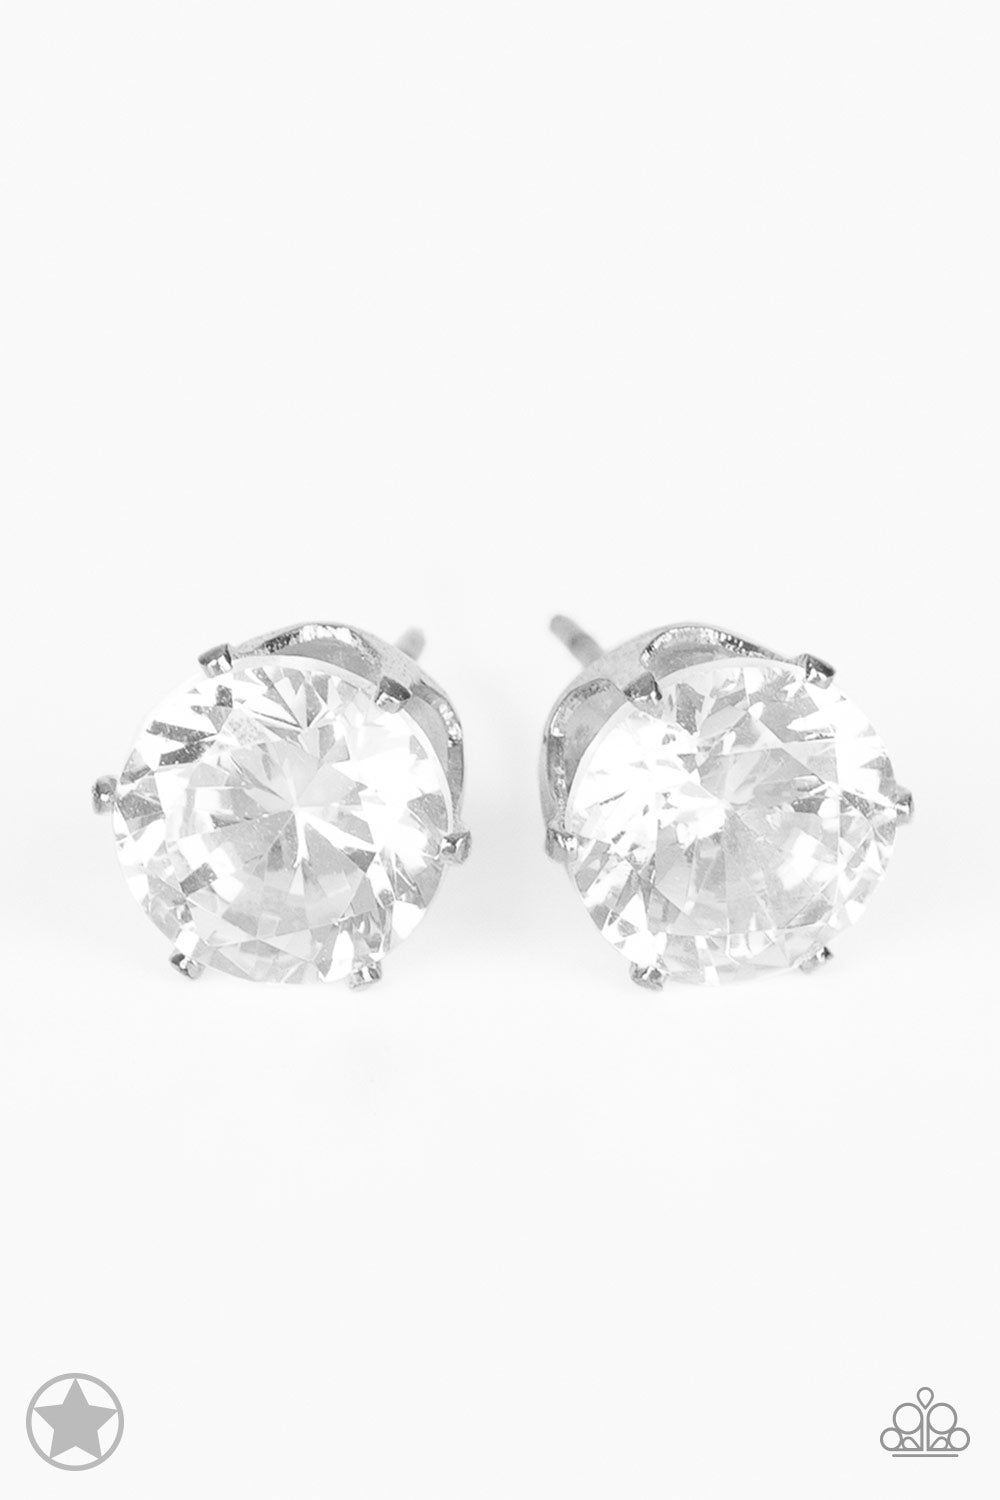 Just In TIMELESS - White and Silver Earrings - Paparazzi Accessories - A sparkling white rhinestone is nestled inside a classic silver frame for a timeless look. Earring attaches to a standard post fitting. Sold as one pair of post earrings.